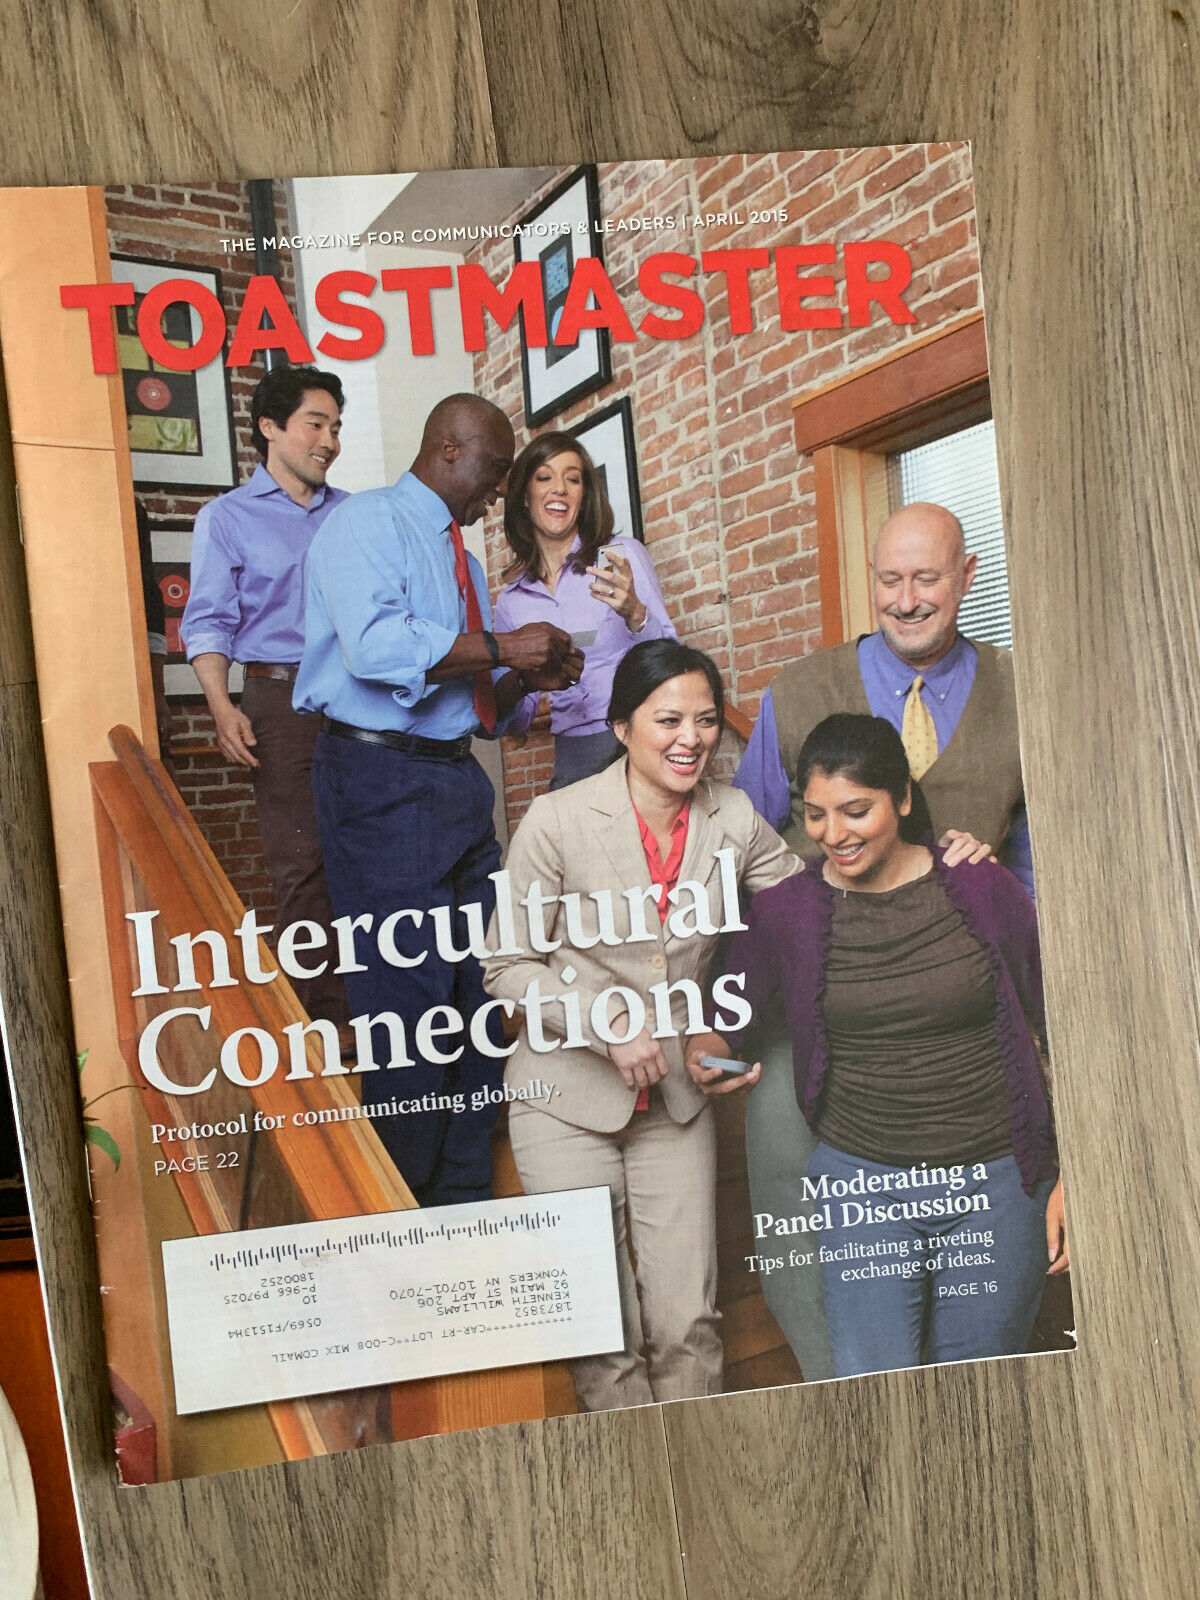 Toastmaster Magazine for Communitcators and Leaders 2011 & 2015 [5 Issues]